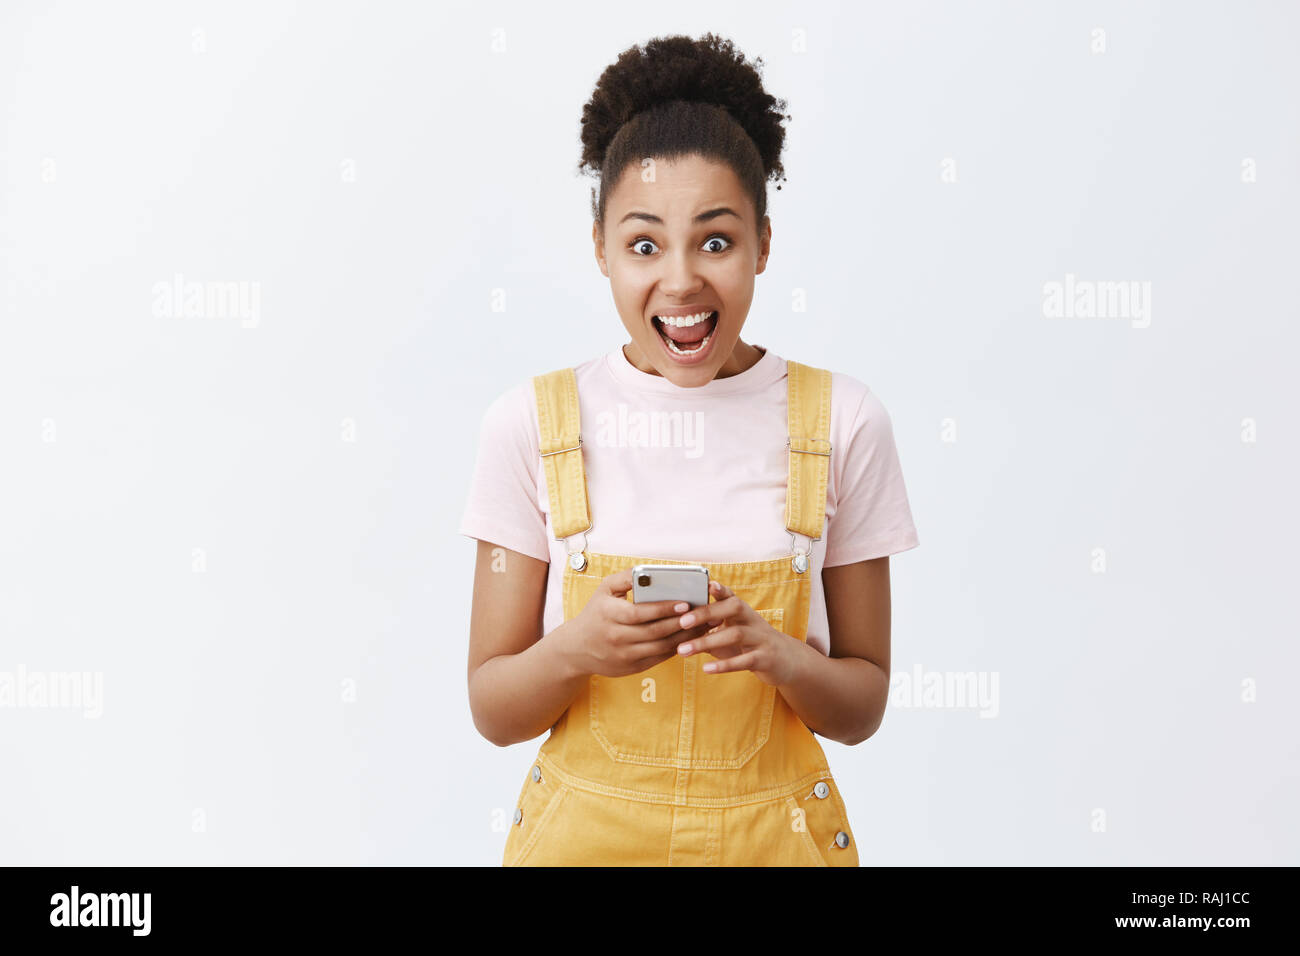 Womans creaming from emotions, receiving invitation to famous party. Portrait of surprised and amazed good-looking dark-skinned girl in yellow overalls, yelling at camera and holding smartphone Stock Photo